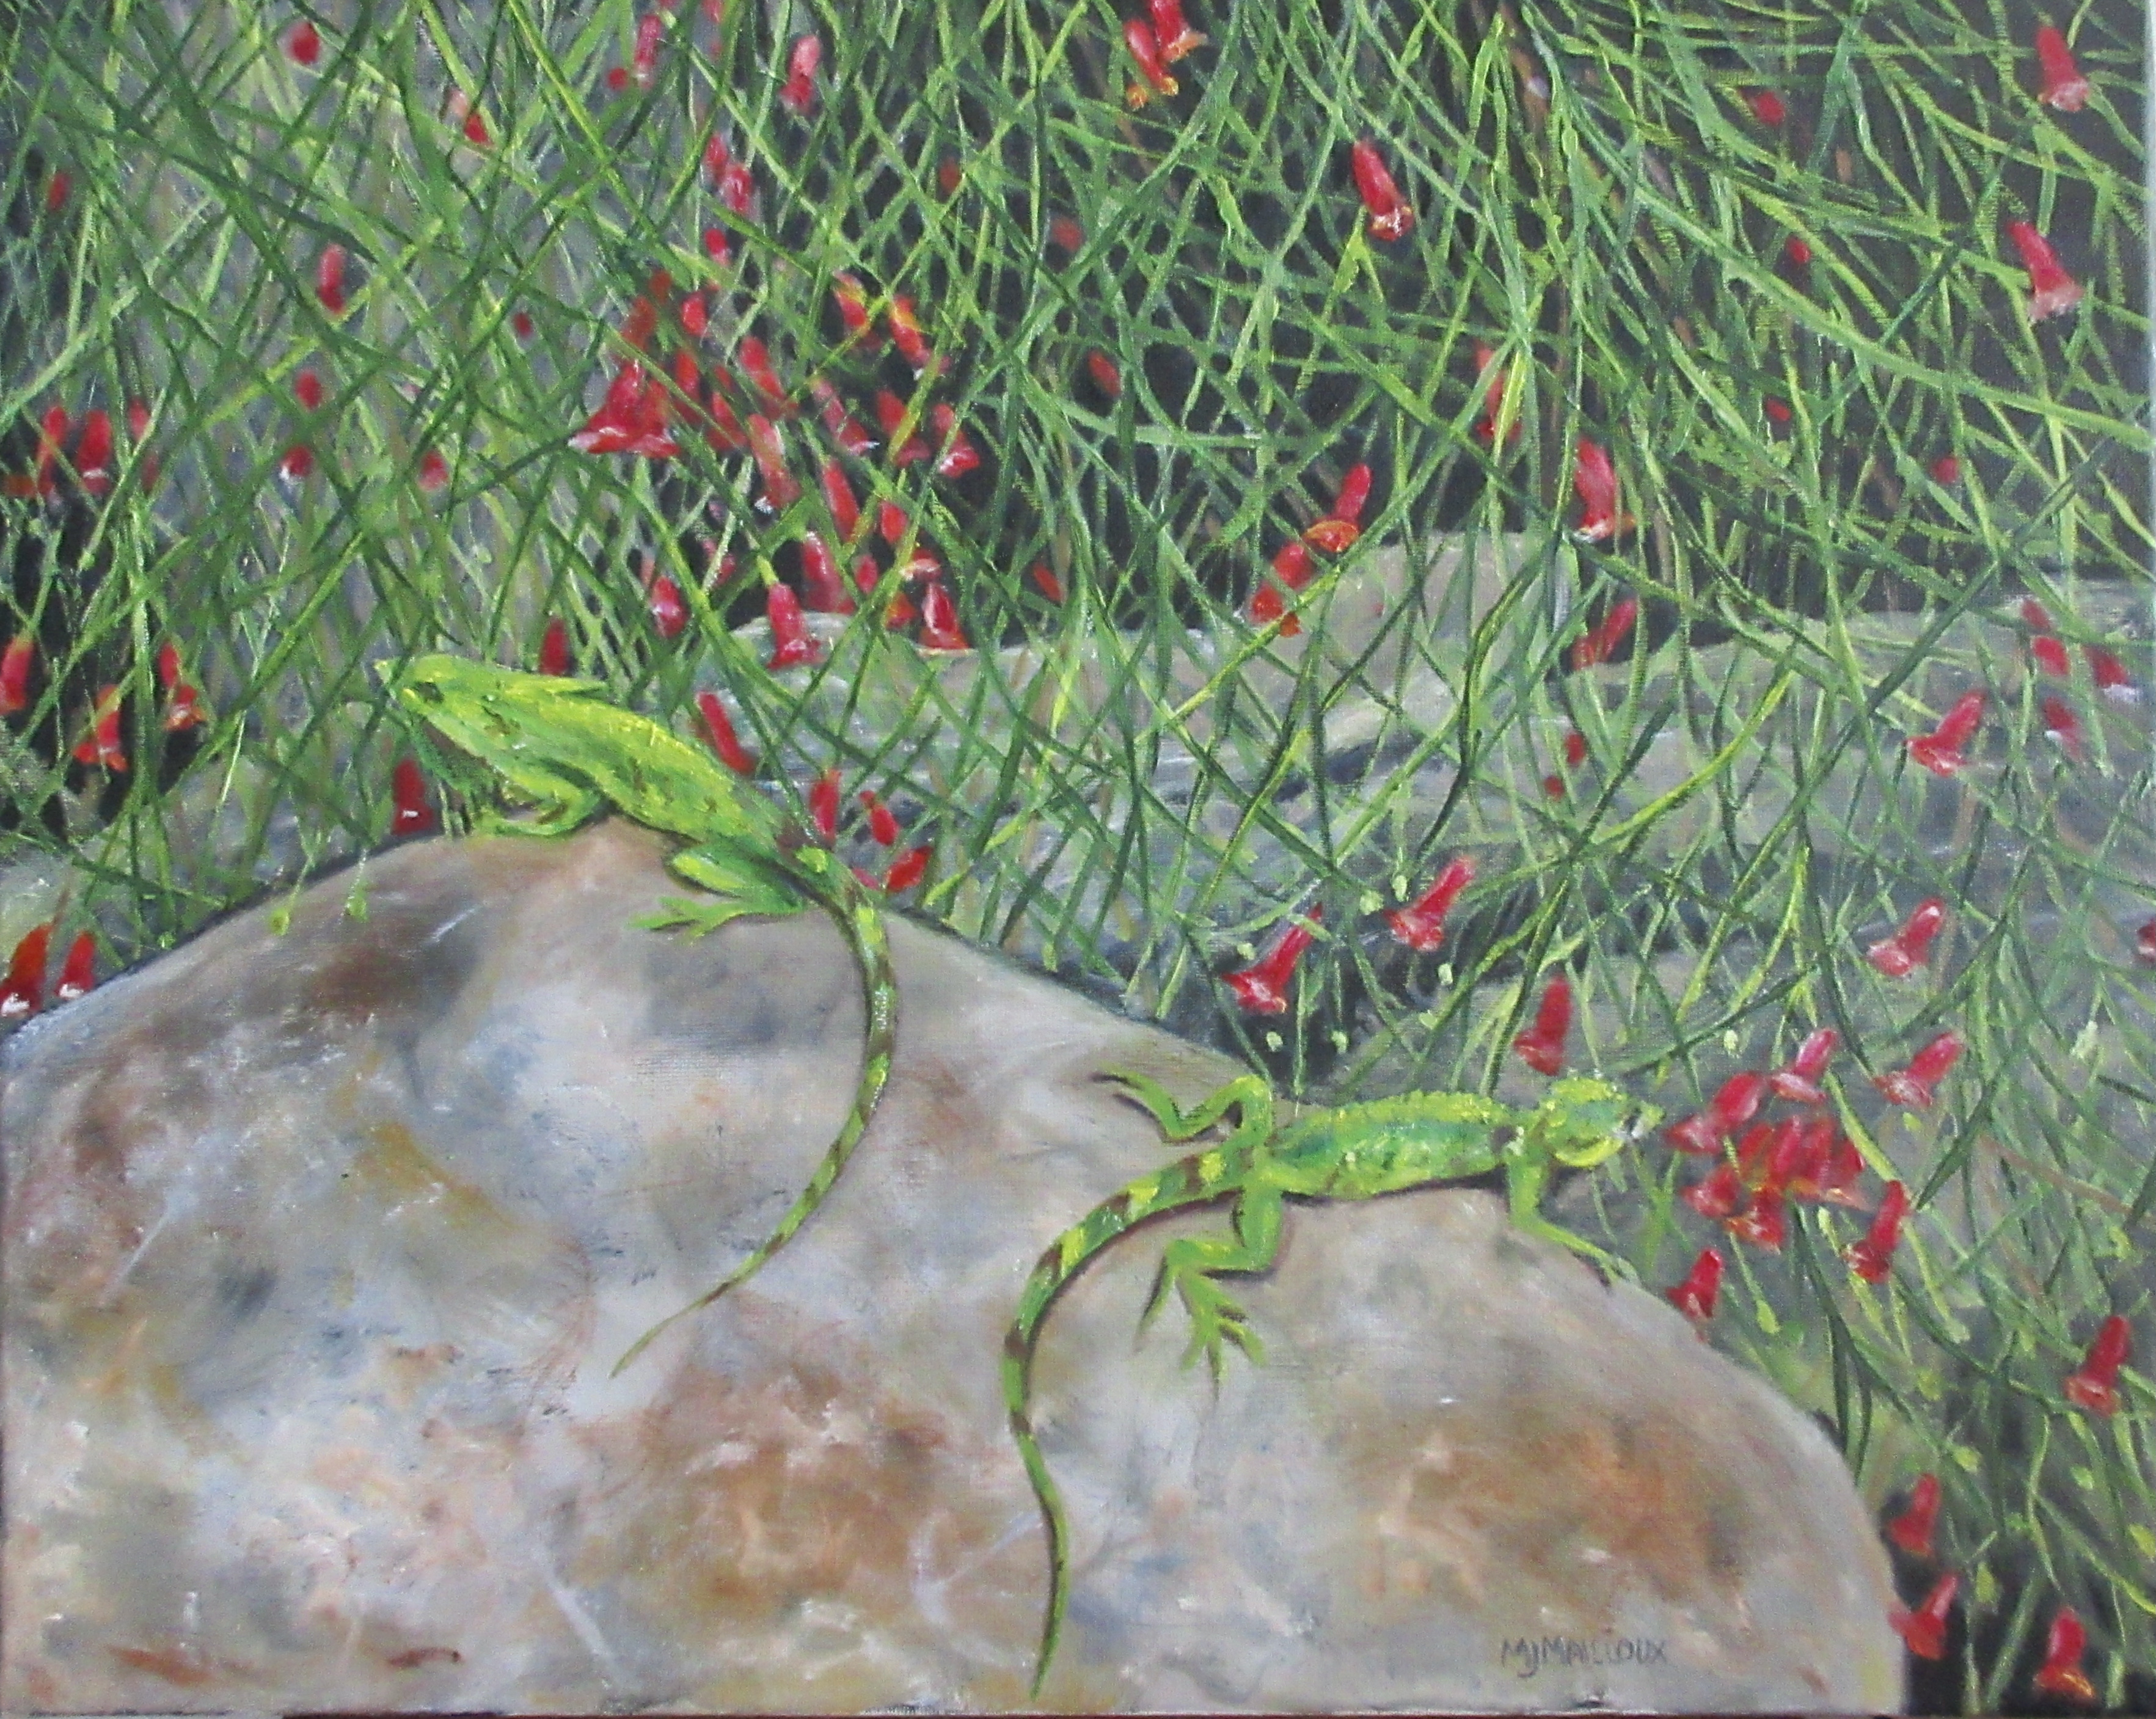 Mary Jean Mailloux; Costa Rica Flora And Fauna, 2020, Original Painting Oil, 20 x 16 inches. Artwork description: 241 Two tiny iguanas finding warmth in the morning sunshine, almost hidden by the camouflage of the cascading flowers over the rocks, brought so much brightness to the day.  I hope I have shared the joy I felt. ...